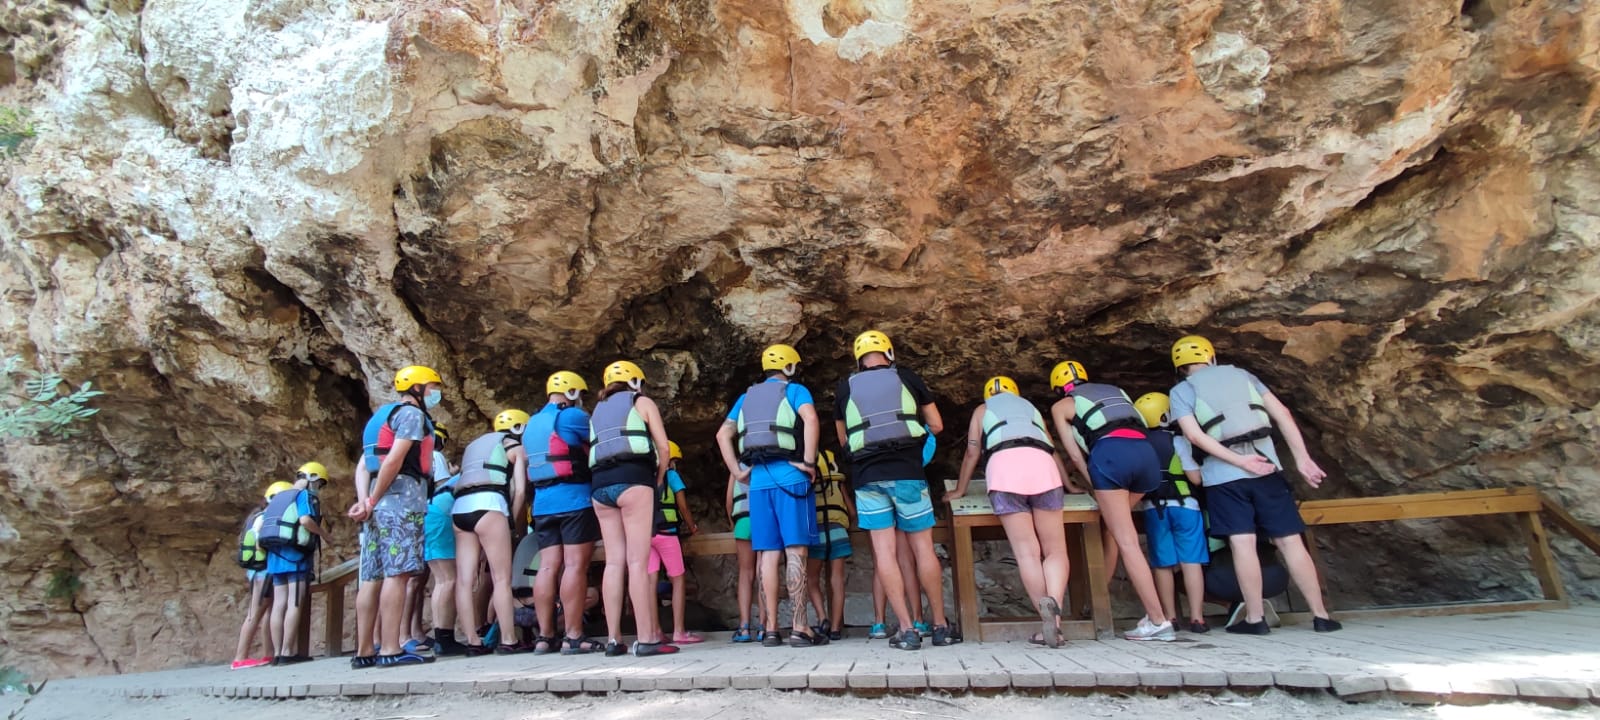 Rafting Adventure, Caves, and Relaxation on the Costa Cálida